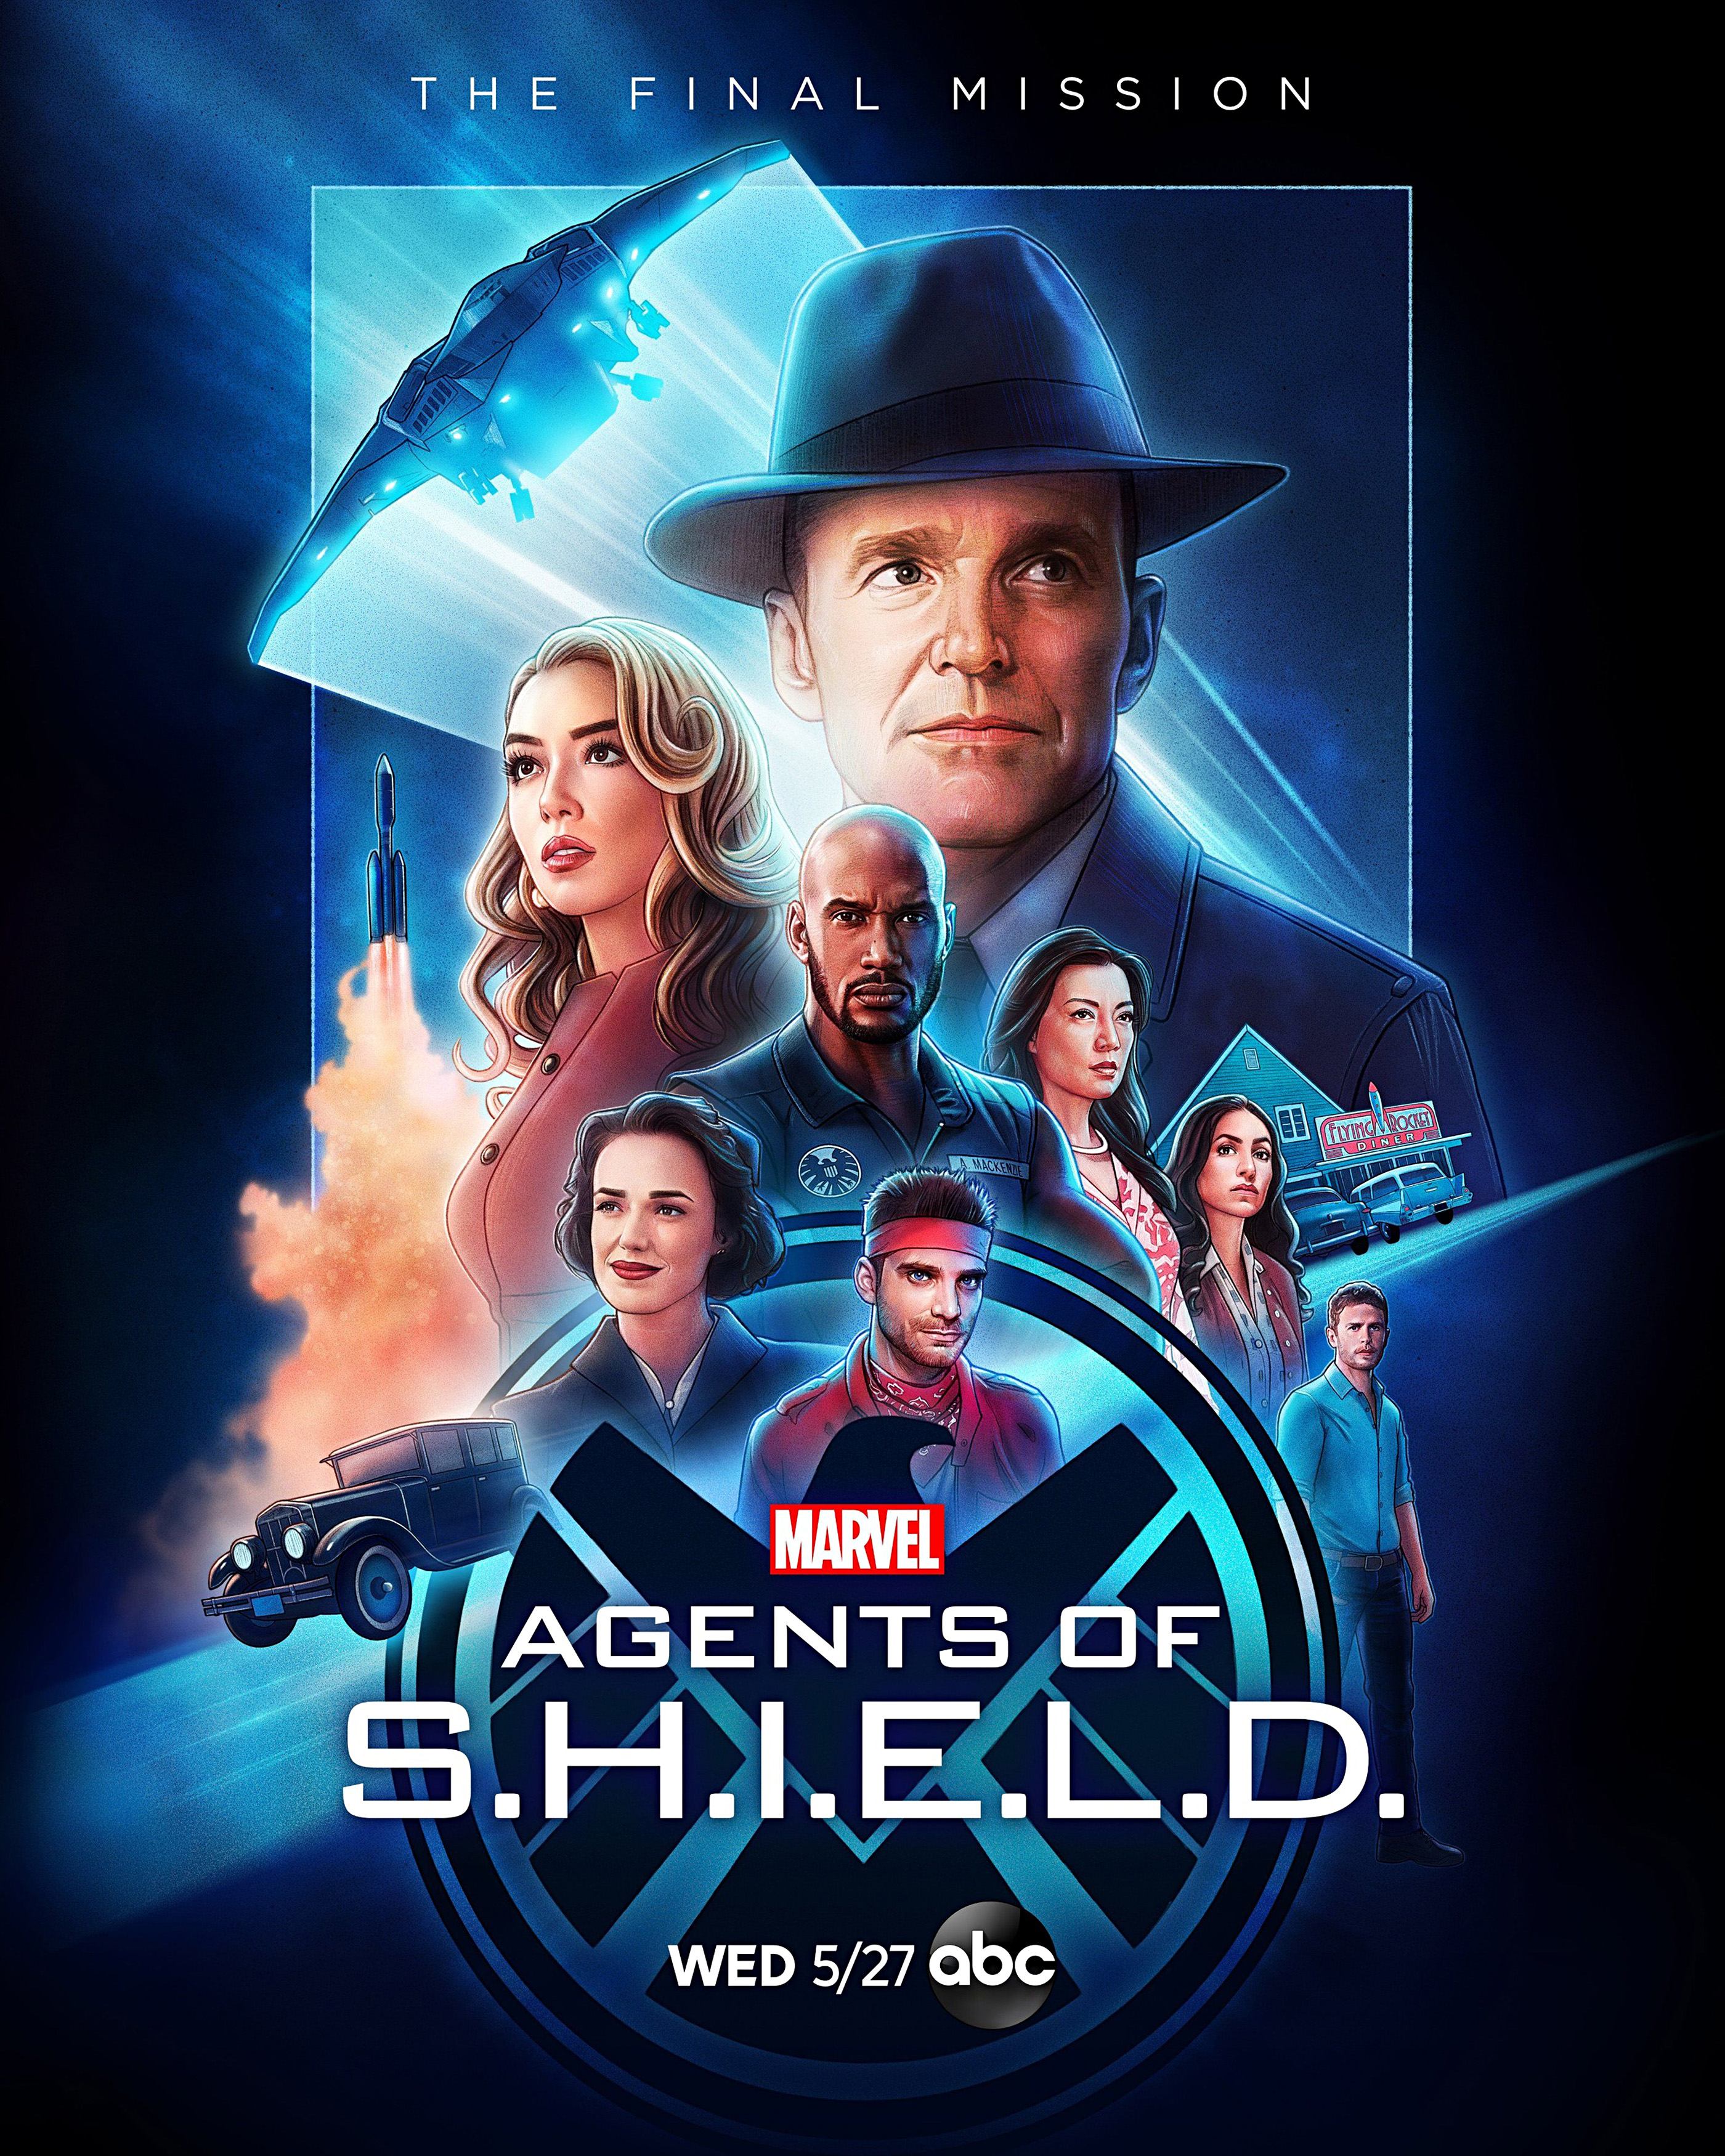 Agents of Shield Season 7 - Illustrated Poster